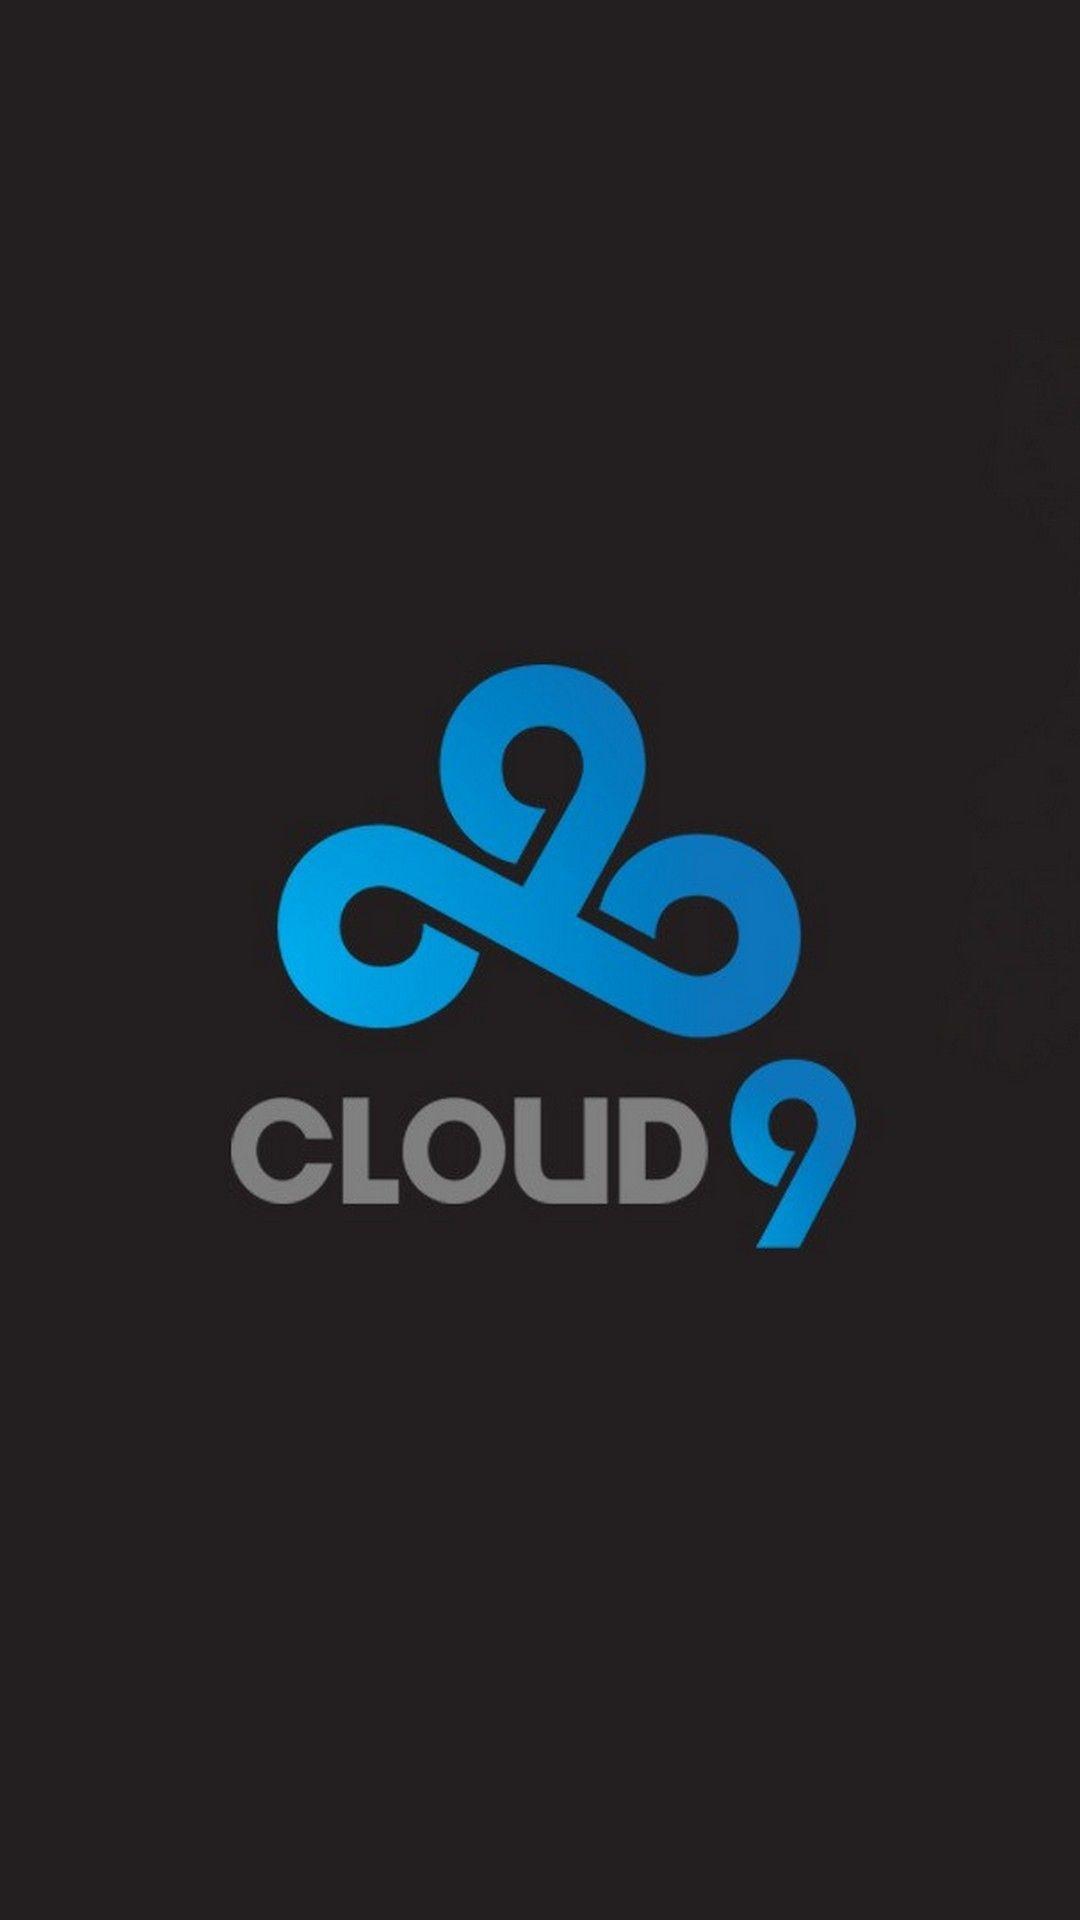 Cloud 9 Games Wallpaper For Android Android Wallpaper. Game